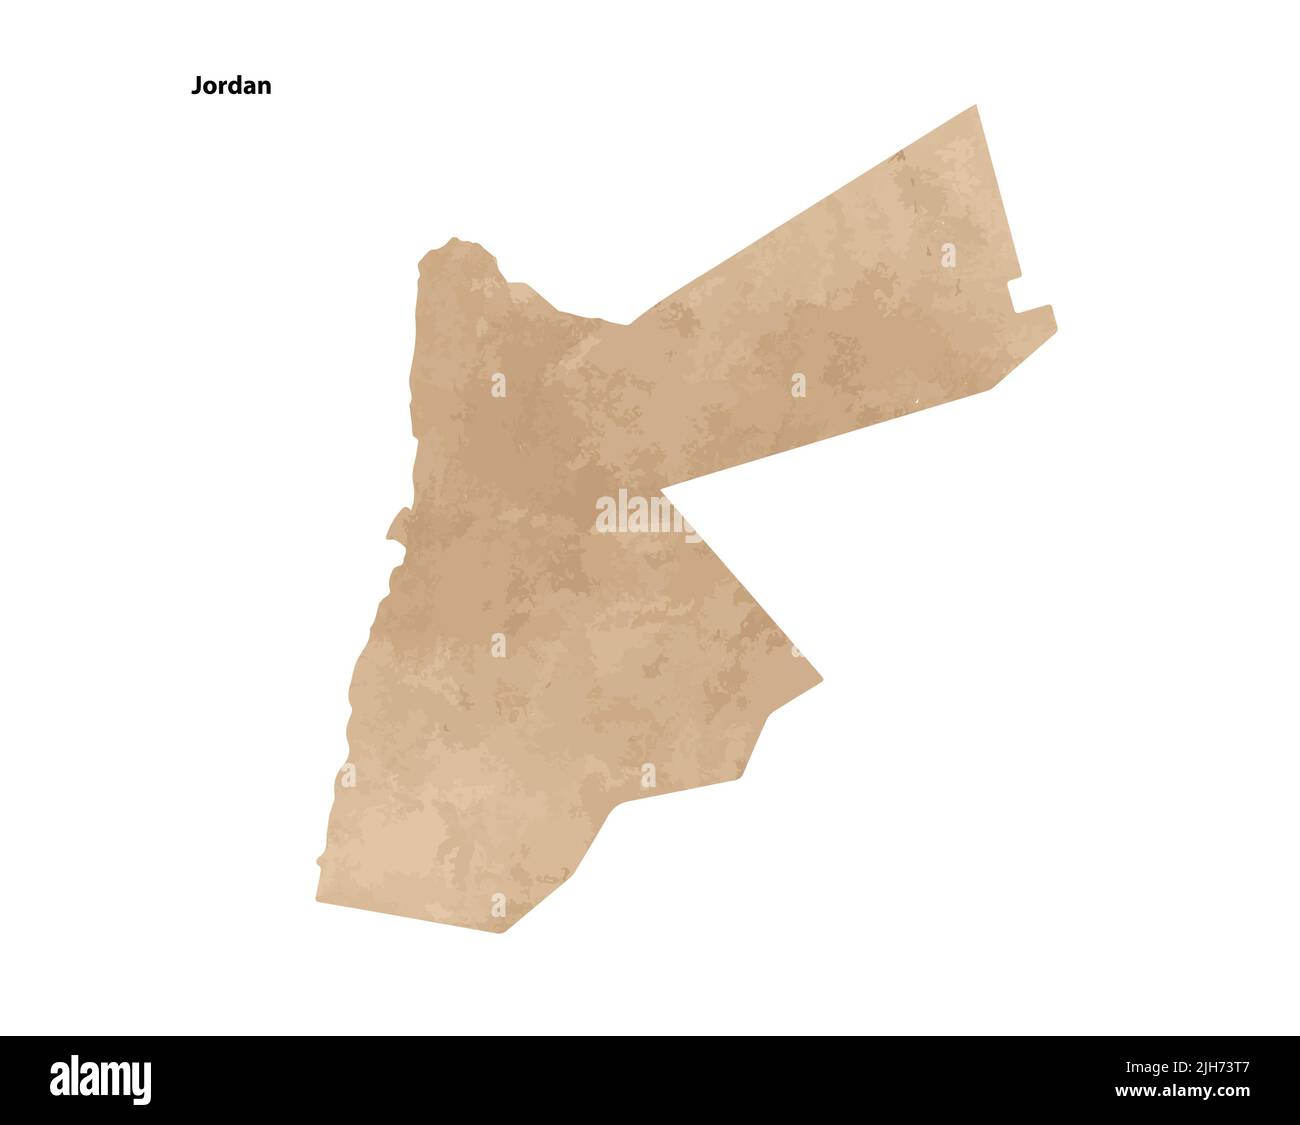 Old vintage paper textured map of Jordan Country - Vector illustration Stock Vector